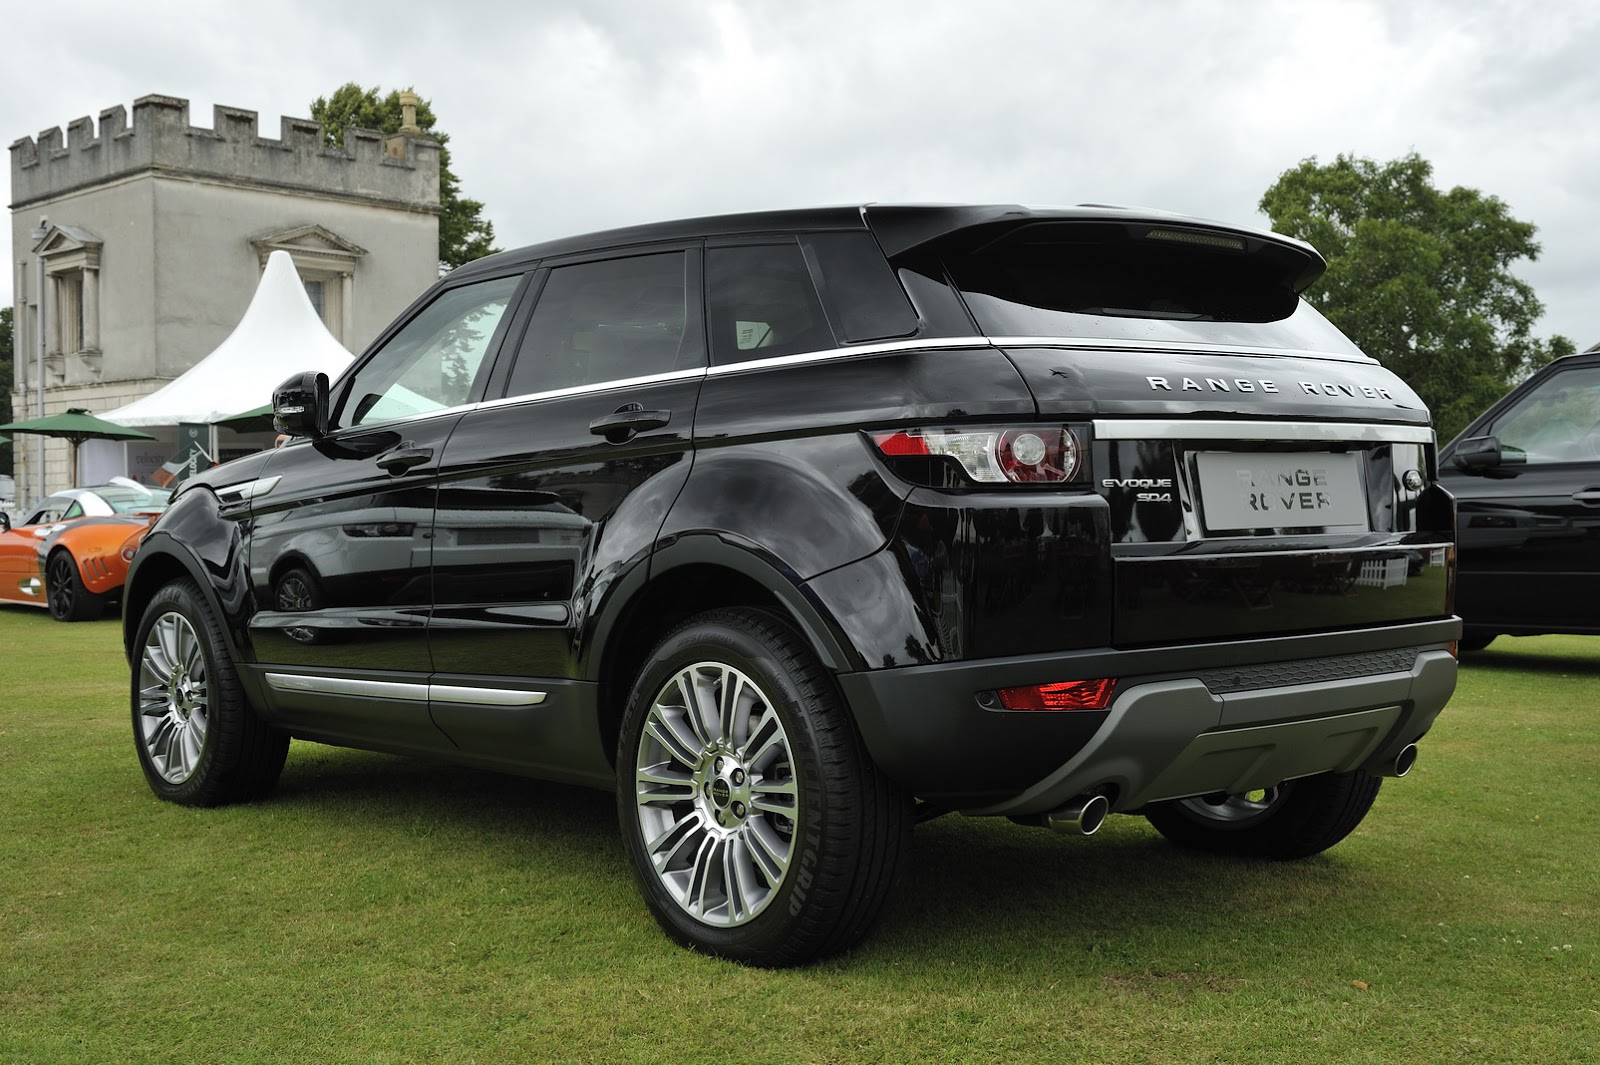 How the Range Rover Evoque Became the "New MINI" Carscoops